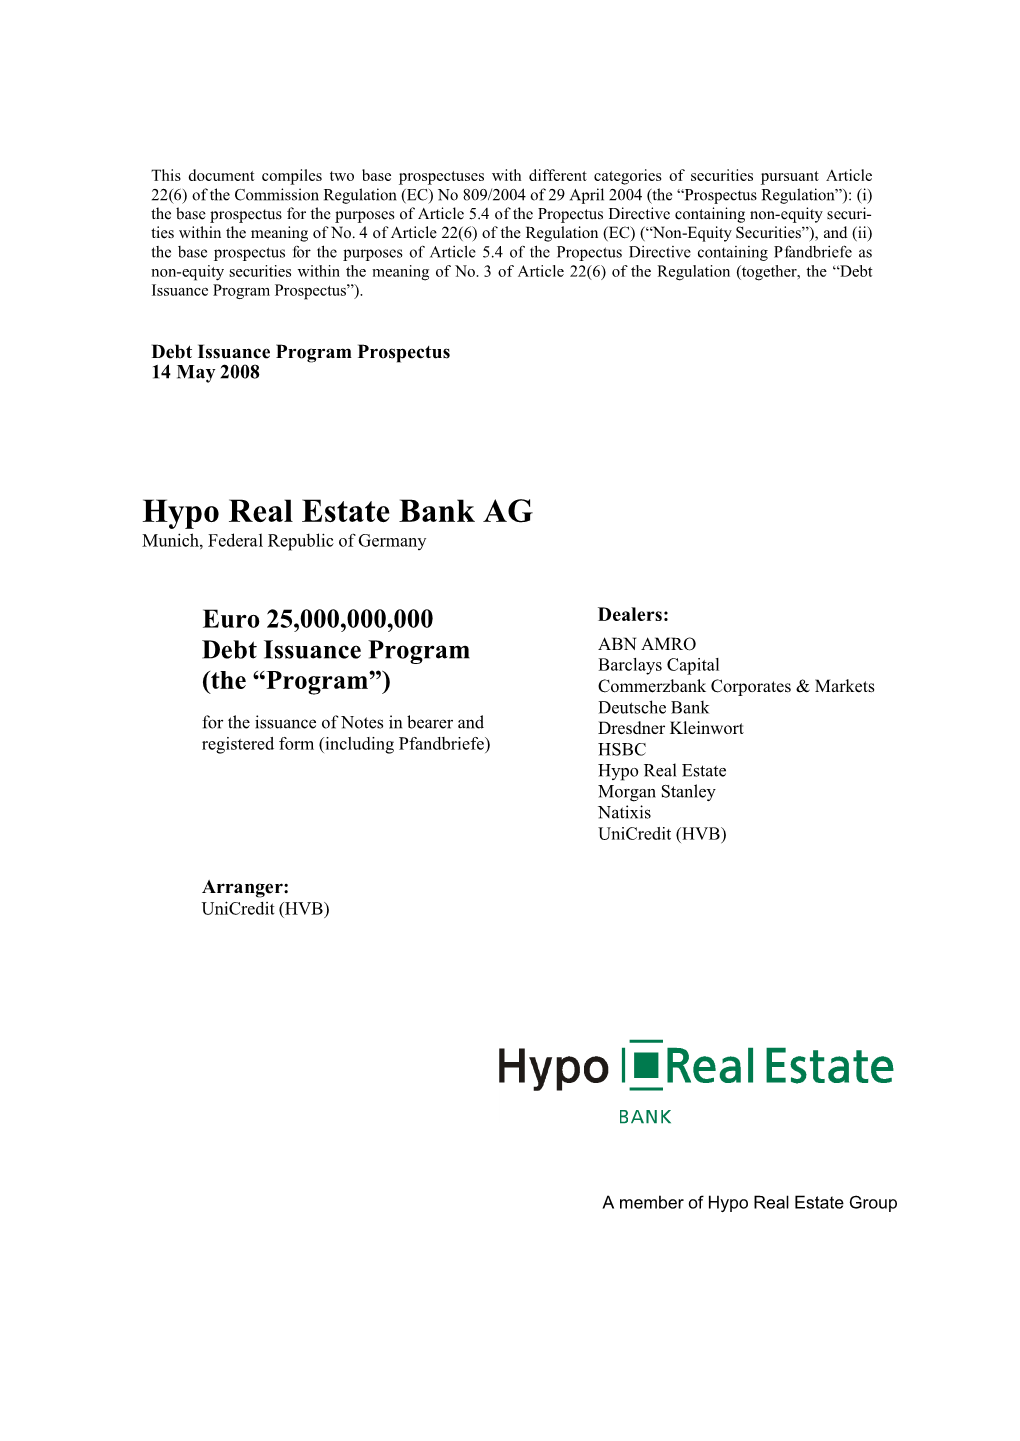 Hypo Real Estate Bank AG Munich, Federal Republic of Germany